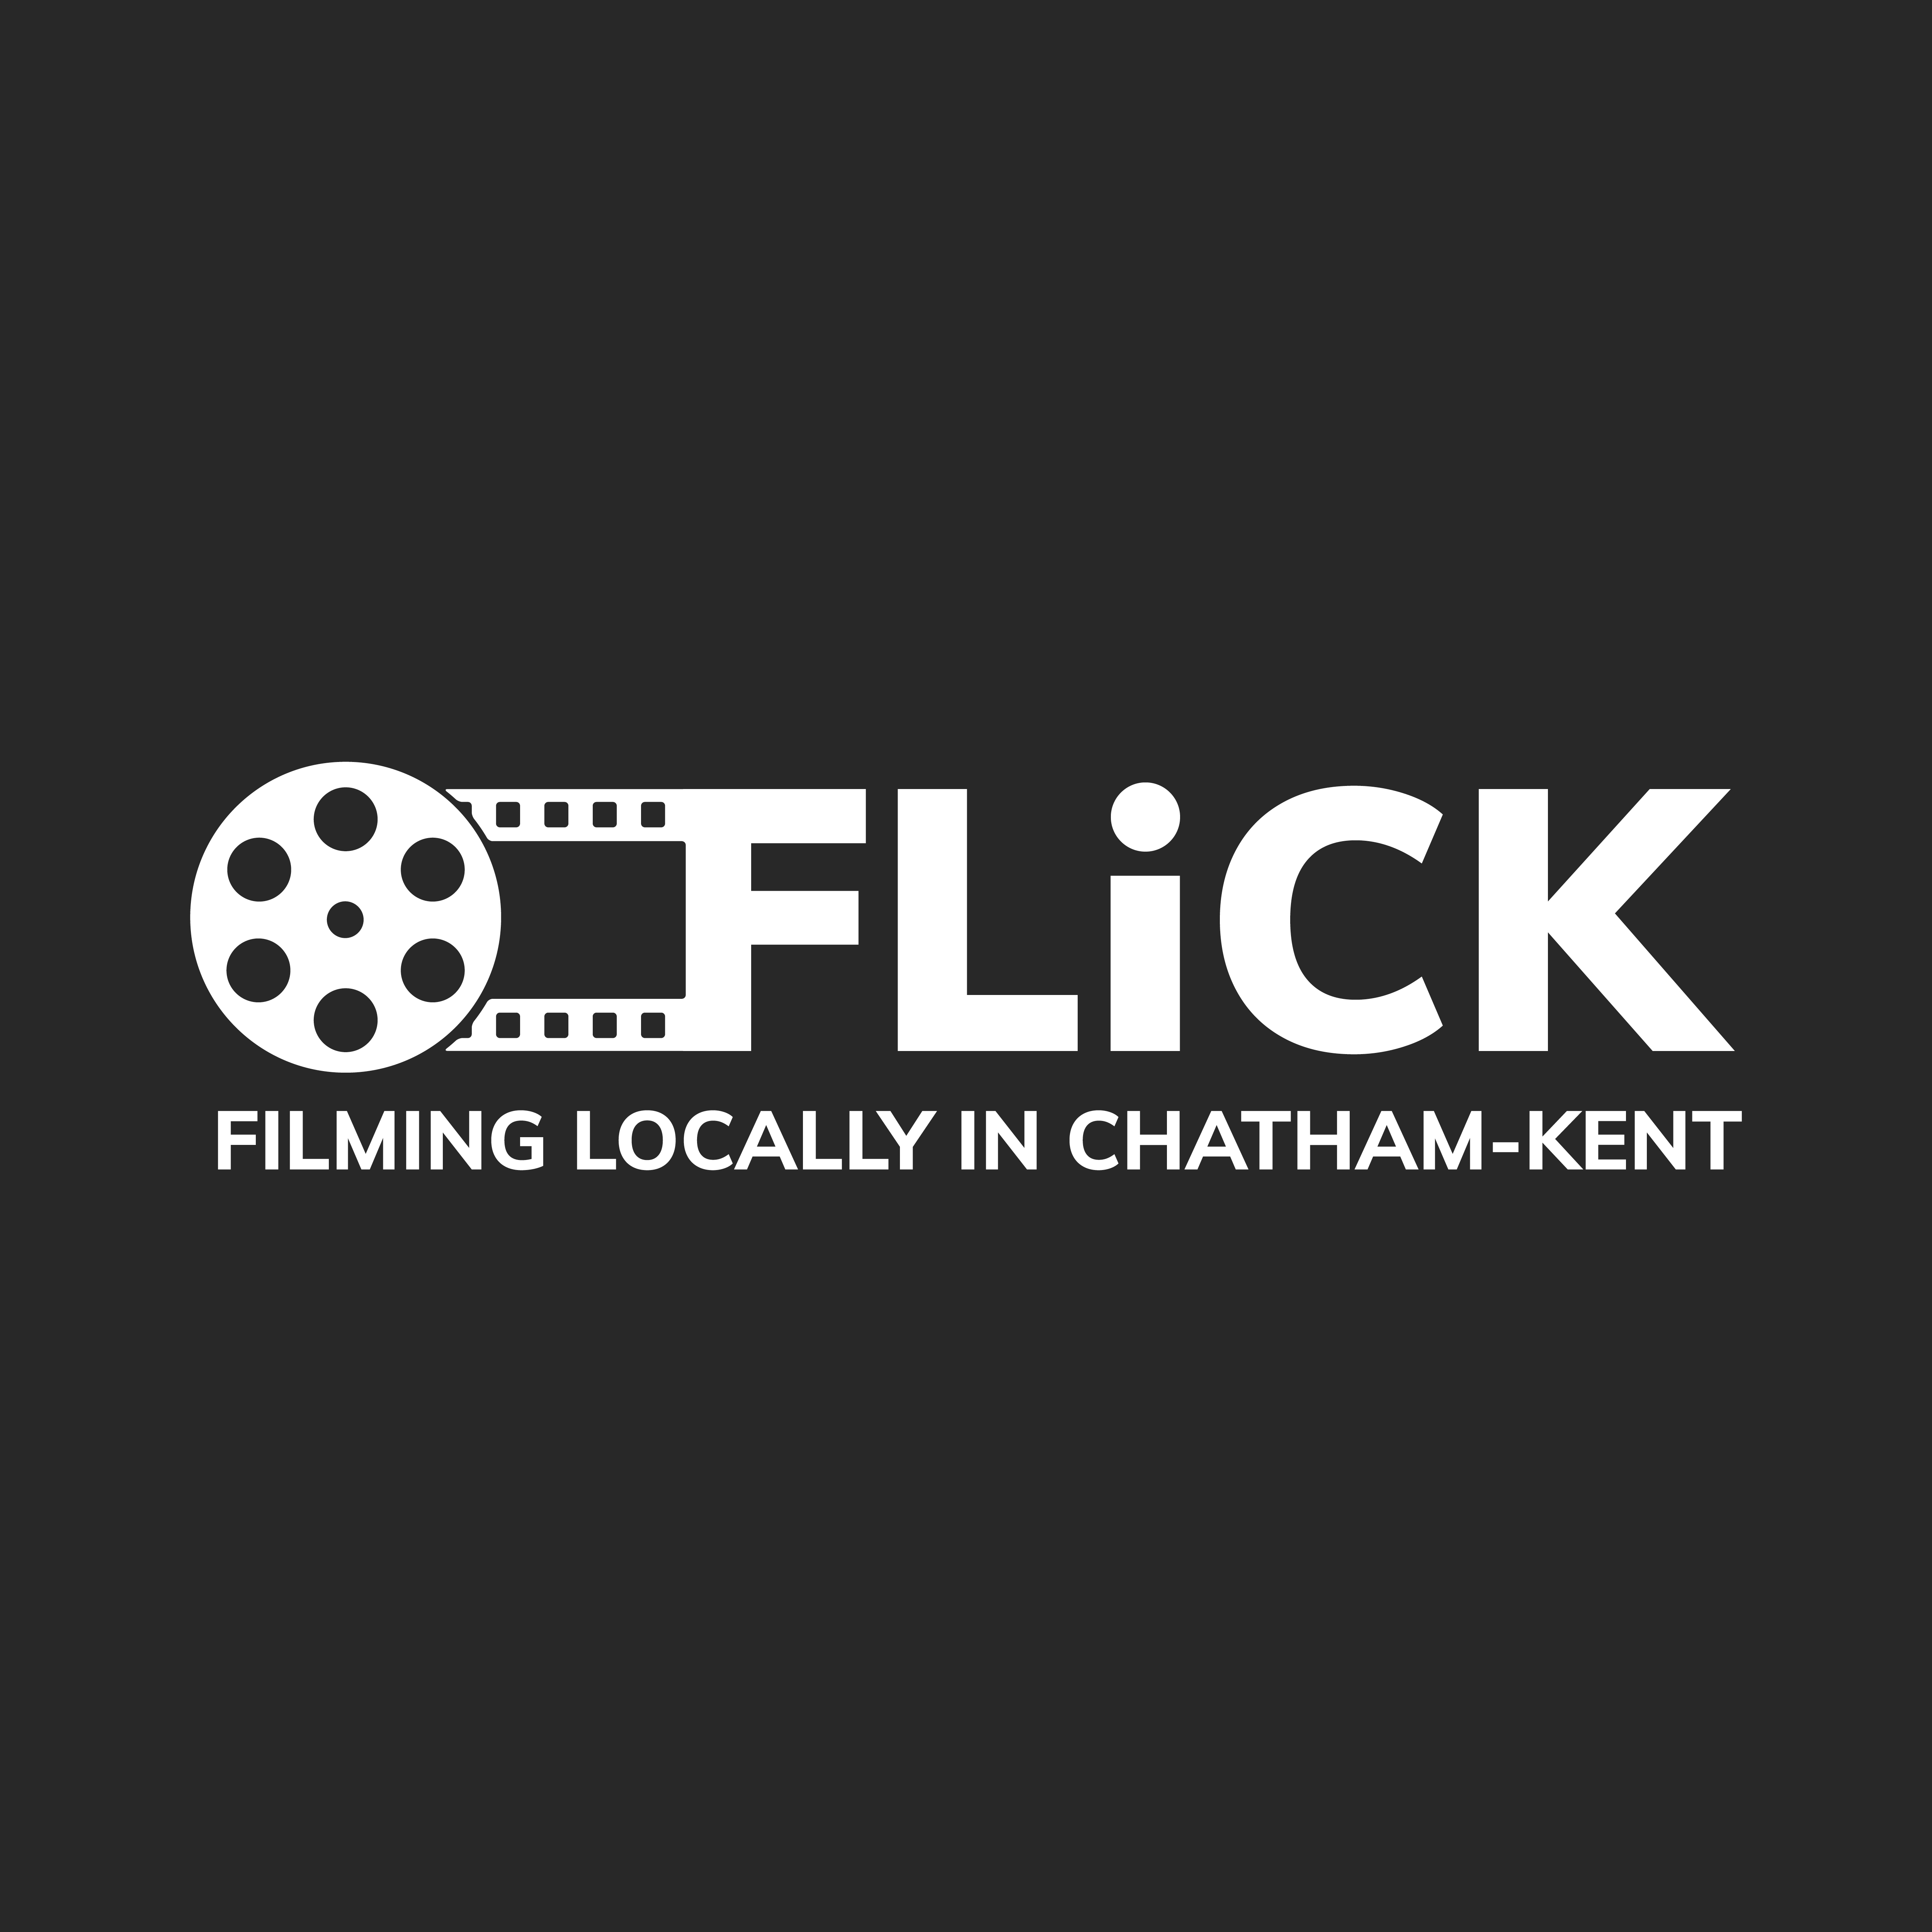 FLICK Logo - Filming Locally in Chatham-Kent